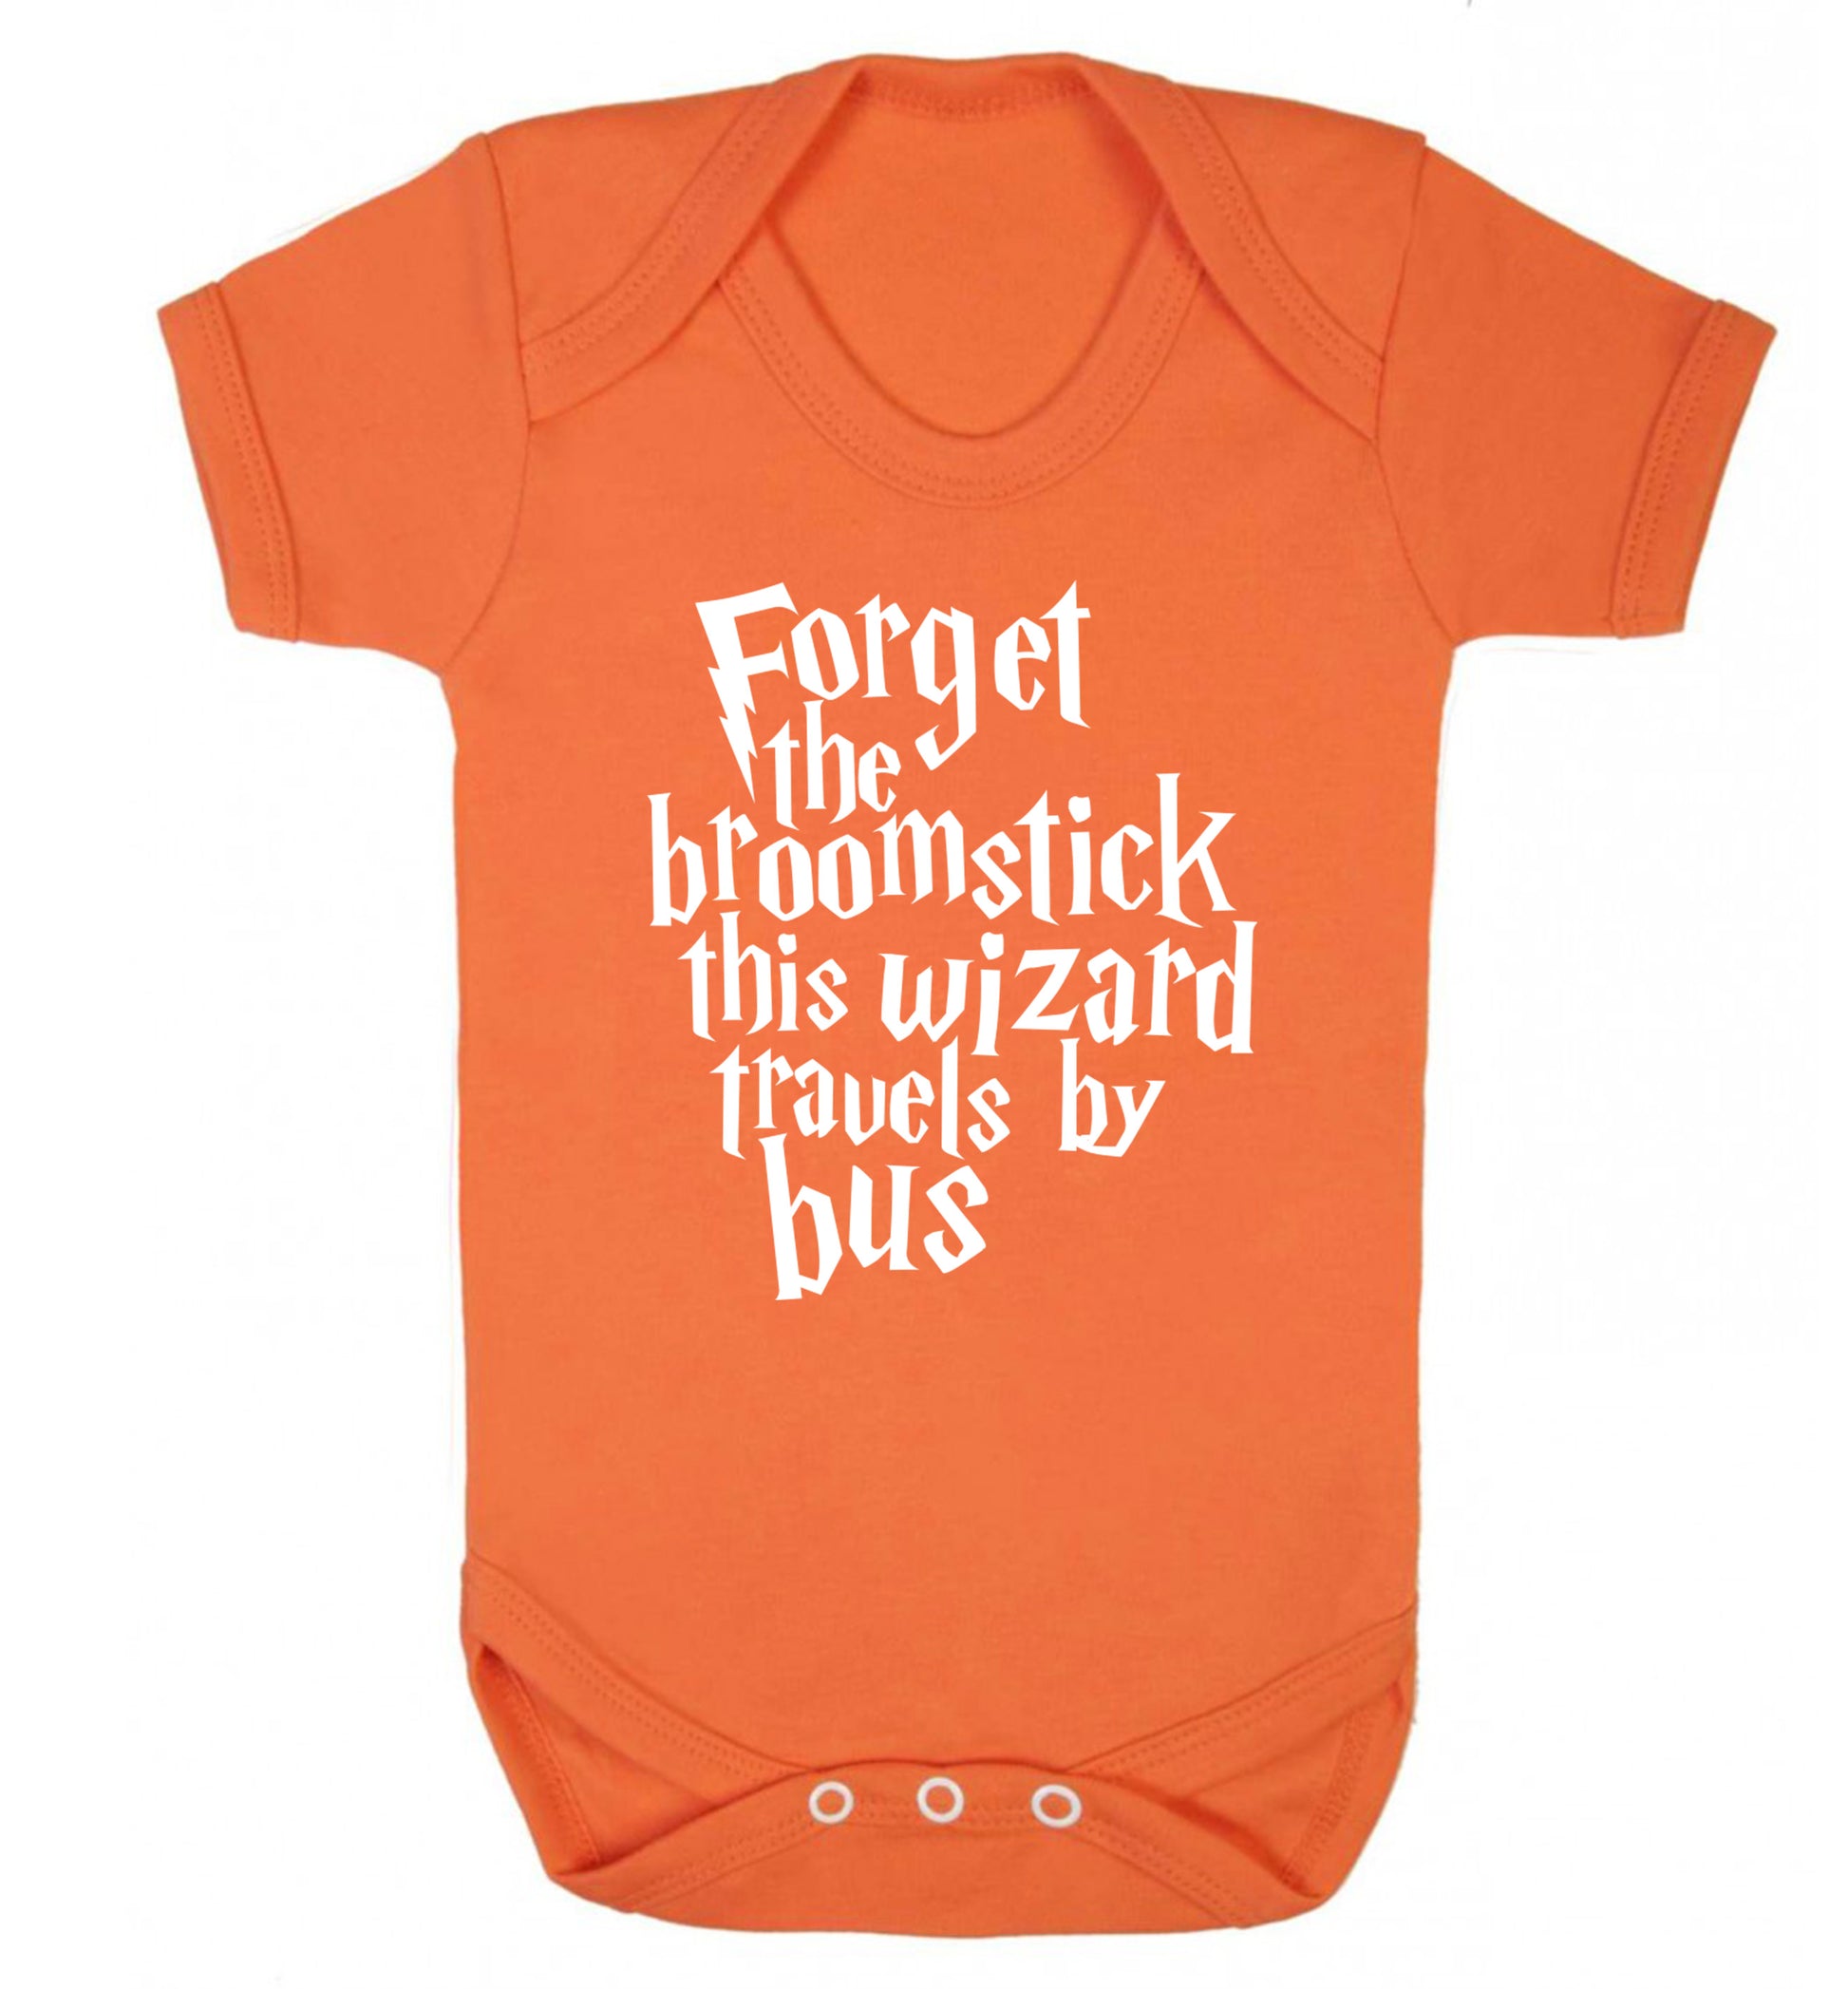 Forget the broomstick this wizard travels by bus Baby Vest orange 18-24 months